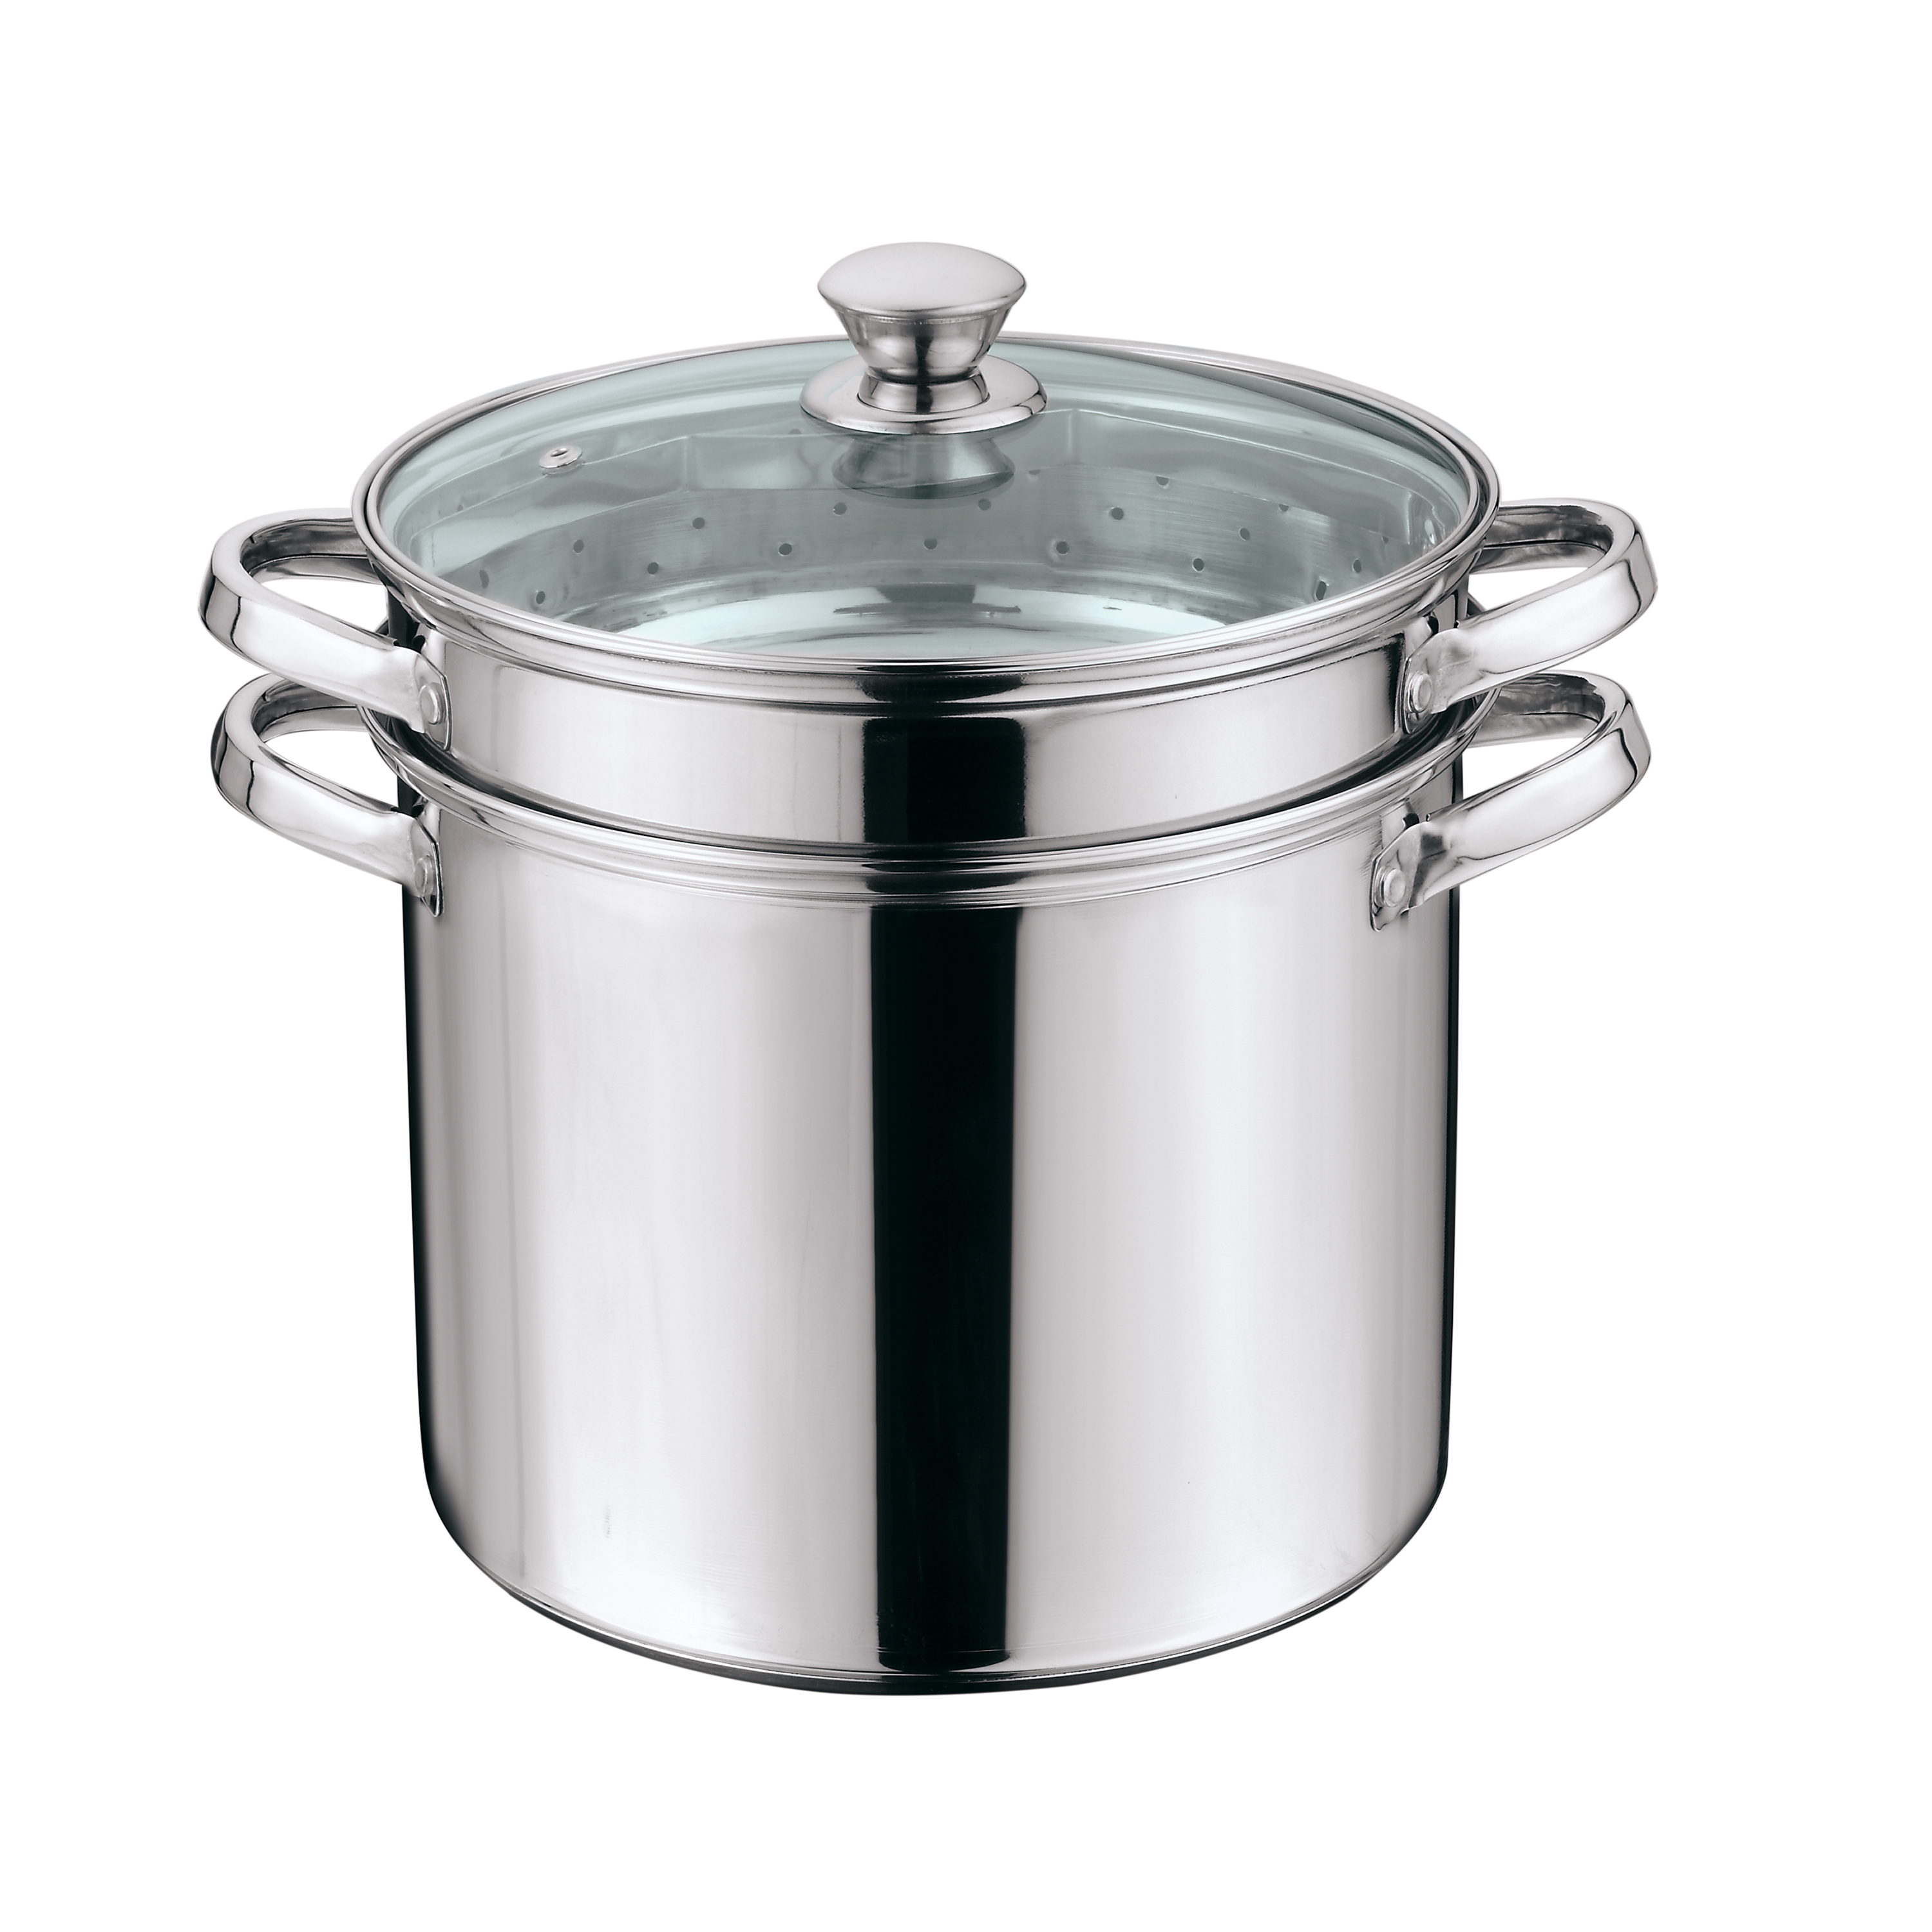 Mainstays Stainless Steel 8 Quart Multi-Cooker Stock pot with Lid - image 6 of 6